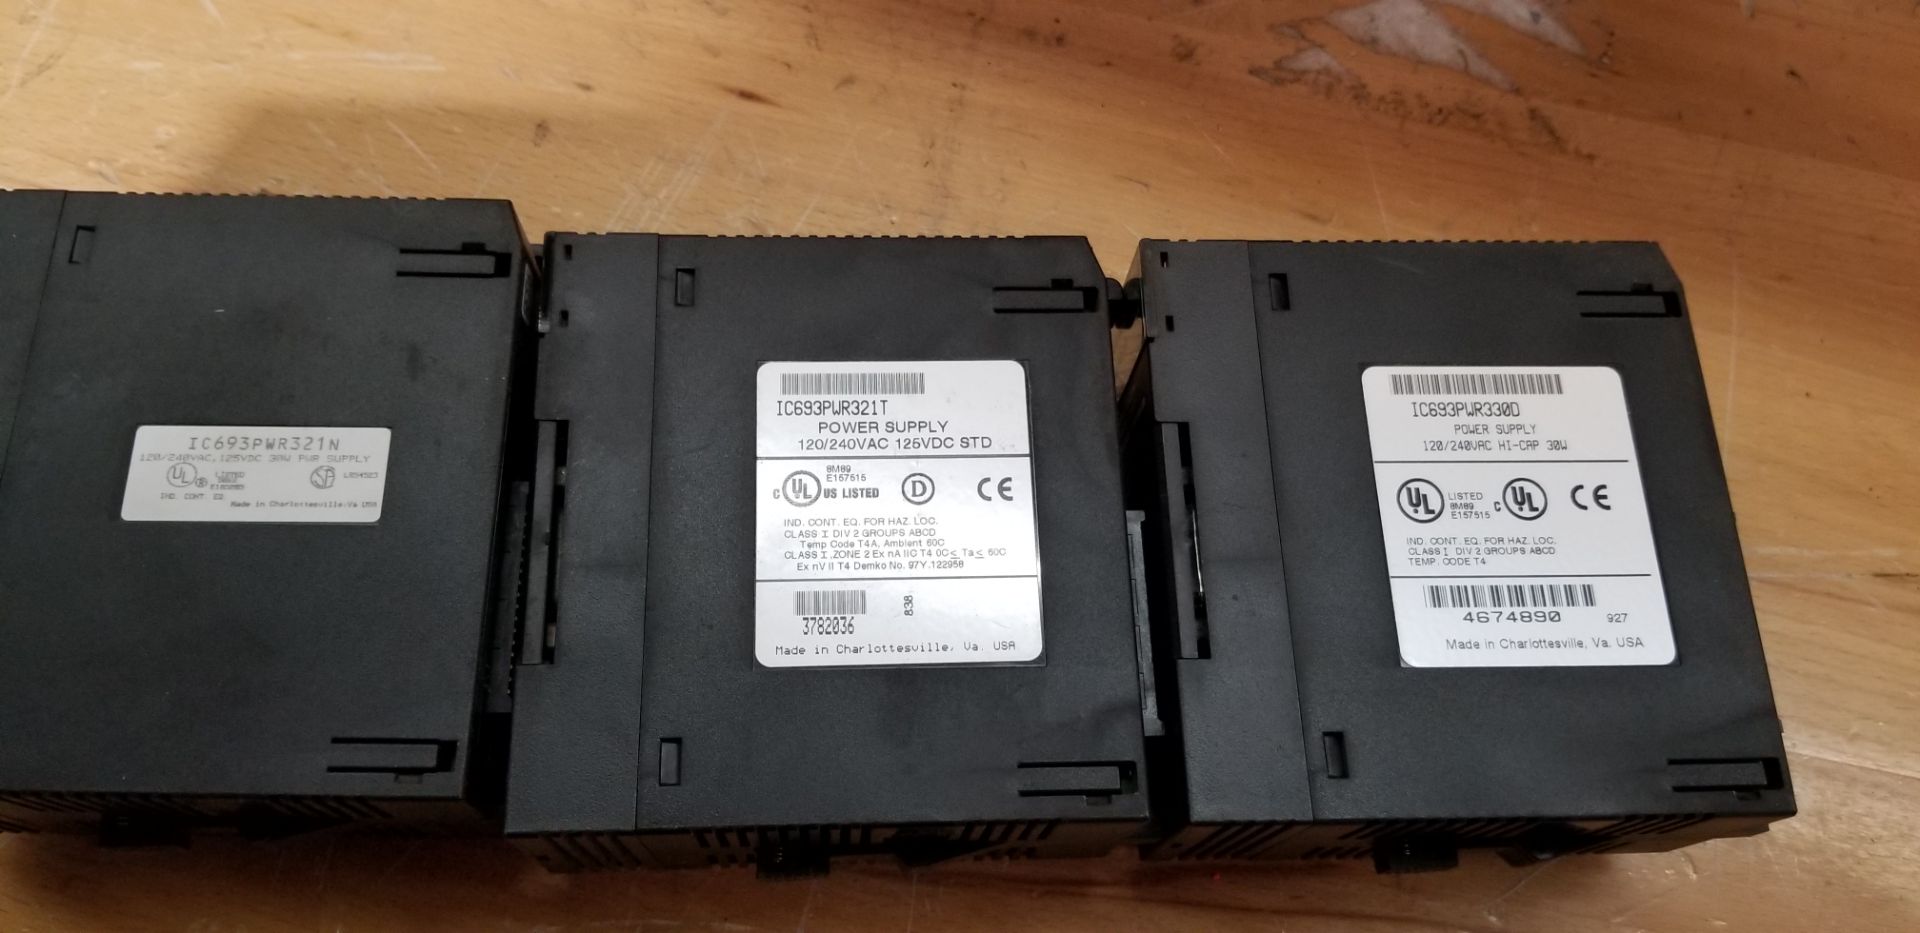 Lot of GE Fanuc Series 90-30 PLC Power Supplies - Image 2 of 2